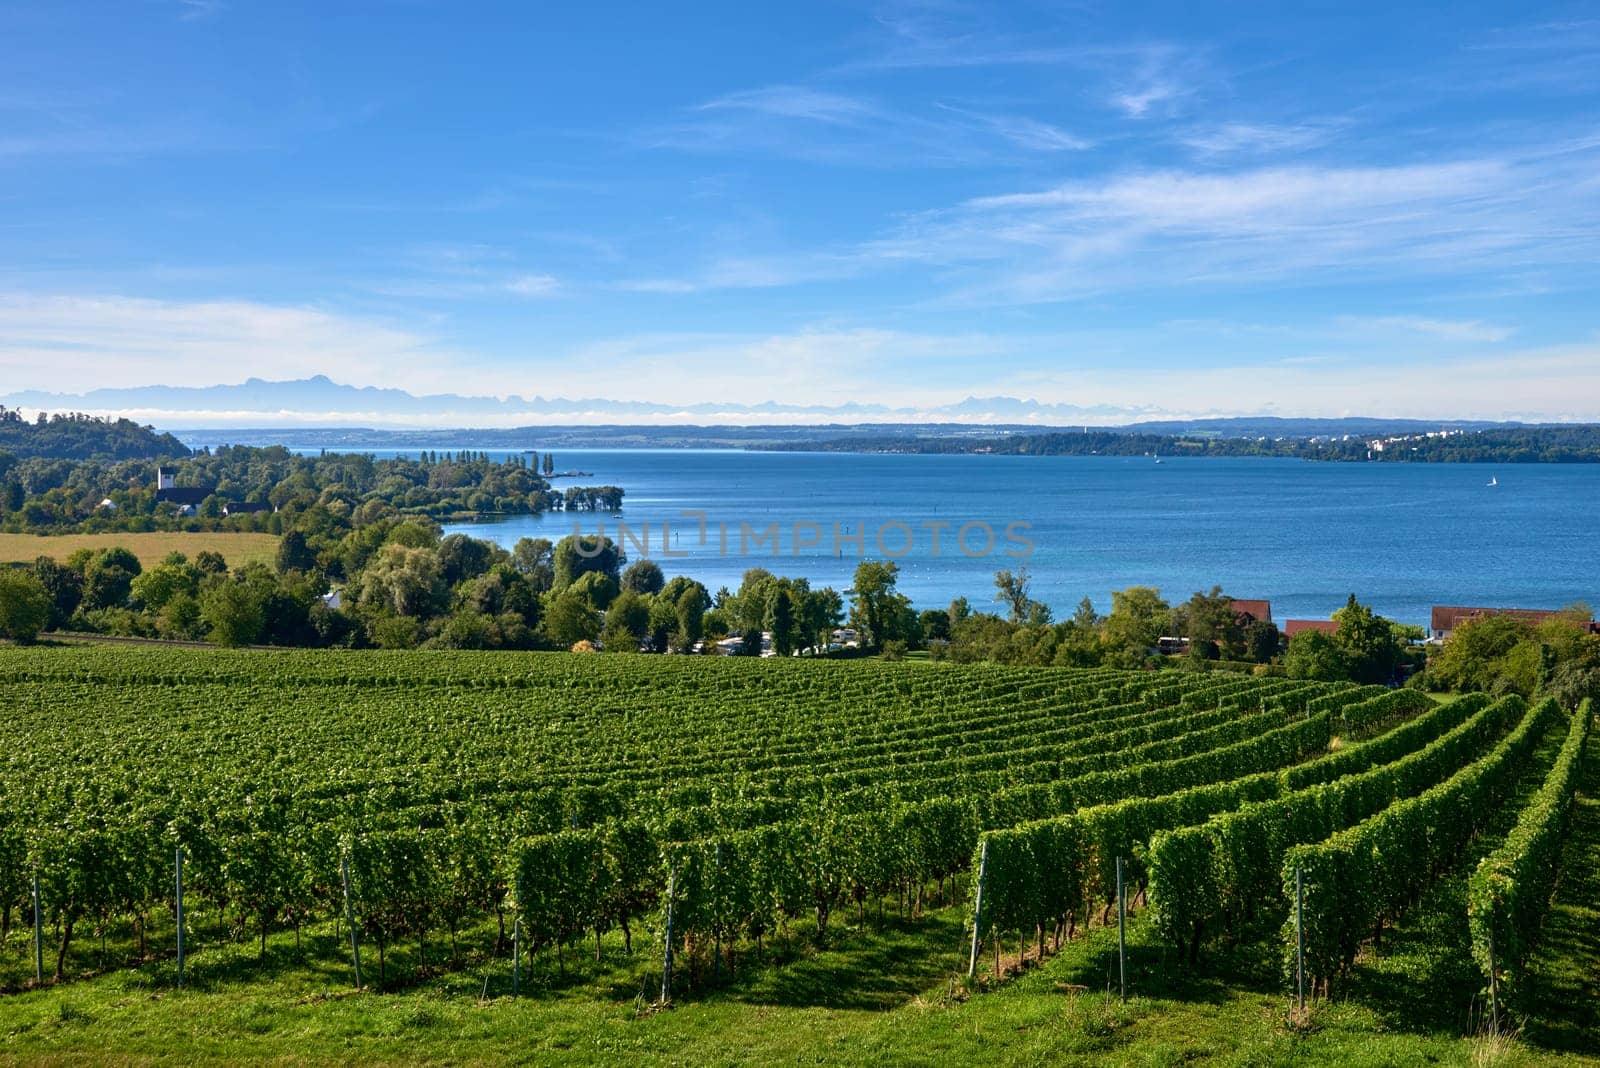 Bodensee Panorama: Alps on the Horizon, Vineyards, and Pastoral Beauty. Alpine Horizon: Bodensee, Vineyards, and Quaint Villages in the German Countryside. Vineyard Vistas: Bodensee, Alpine Peaks, and the Rural Charm of German Agriculture. Rural Tranquility: Bodensee Overlooking Pastures, Vineyards, and Traditional Villages by Andrii_Ko